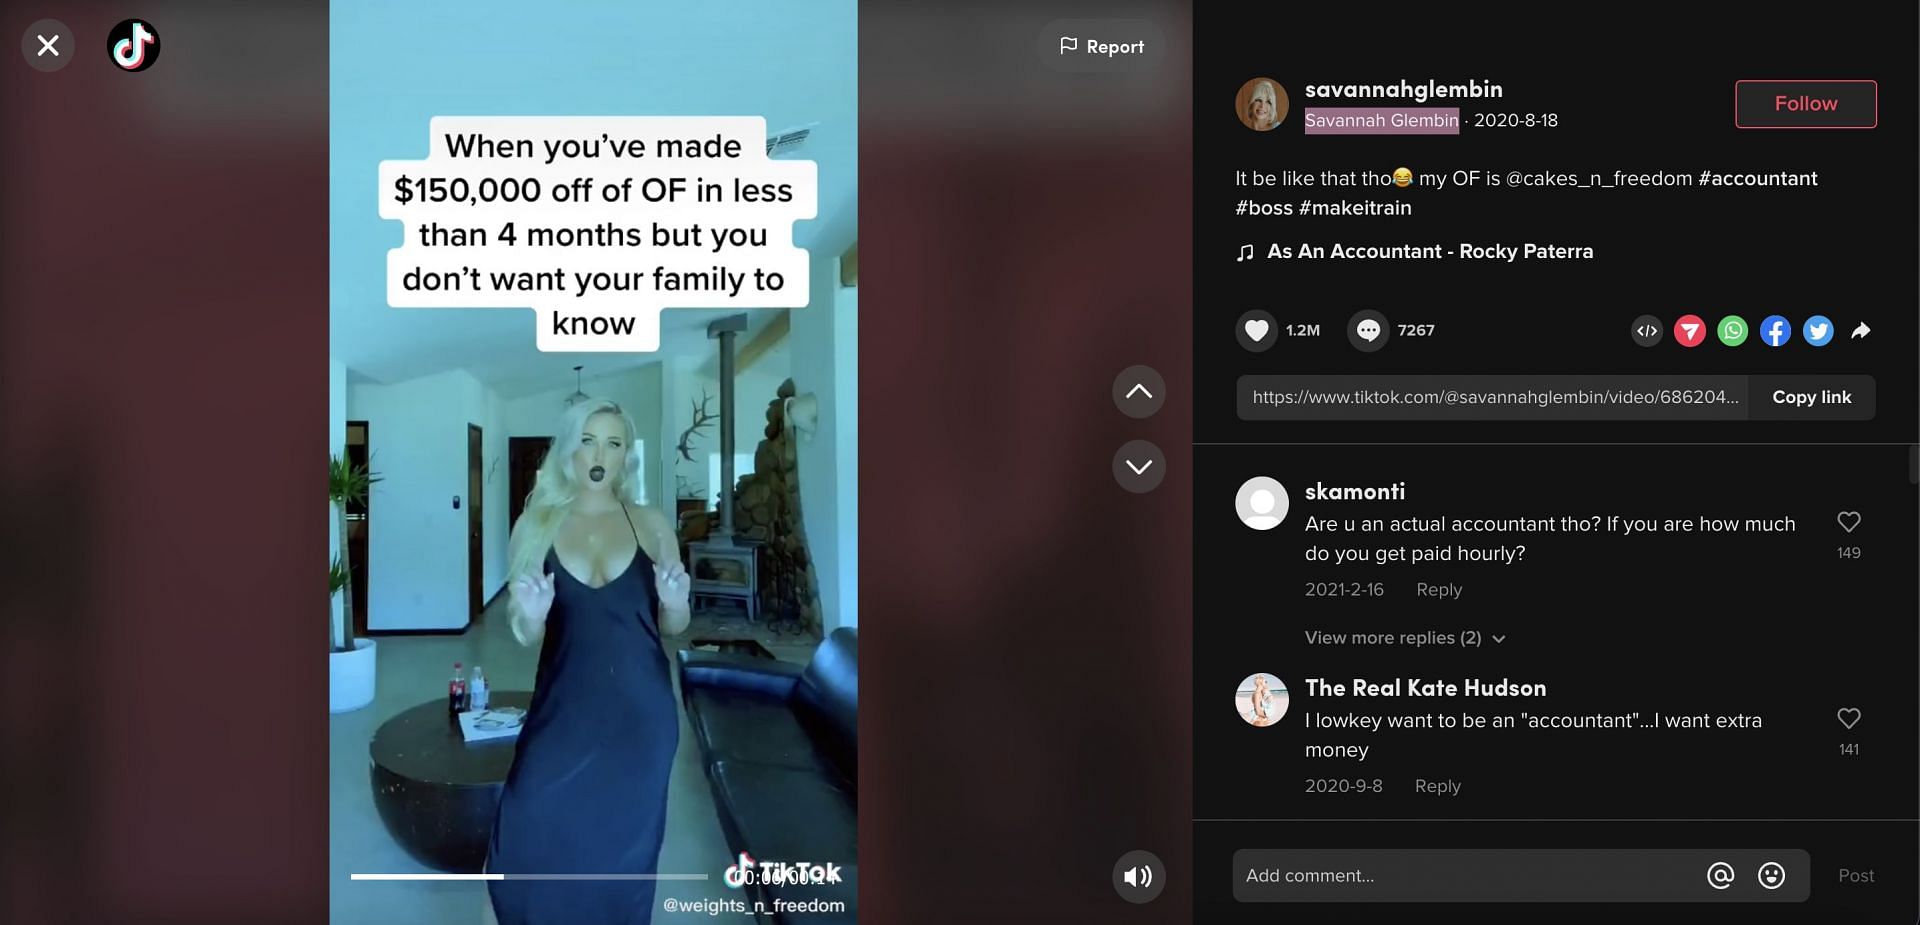 Savannah Glembin created a video about earning $150,000 in 4 months. (image via TikTok)